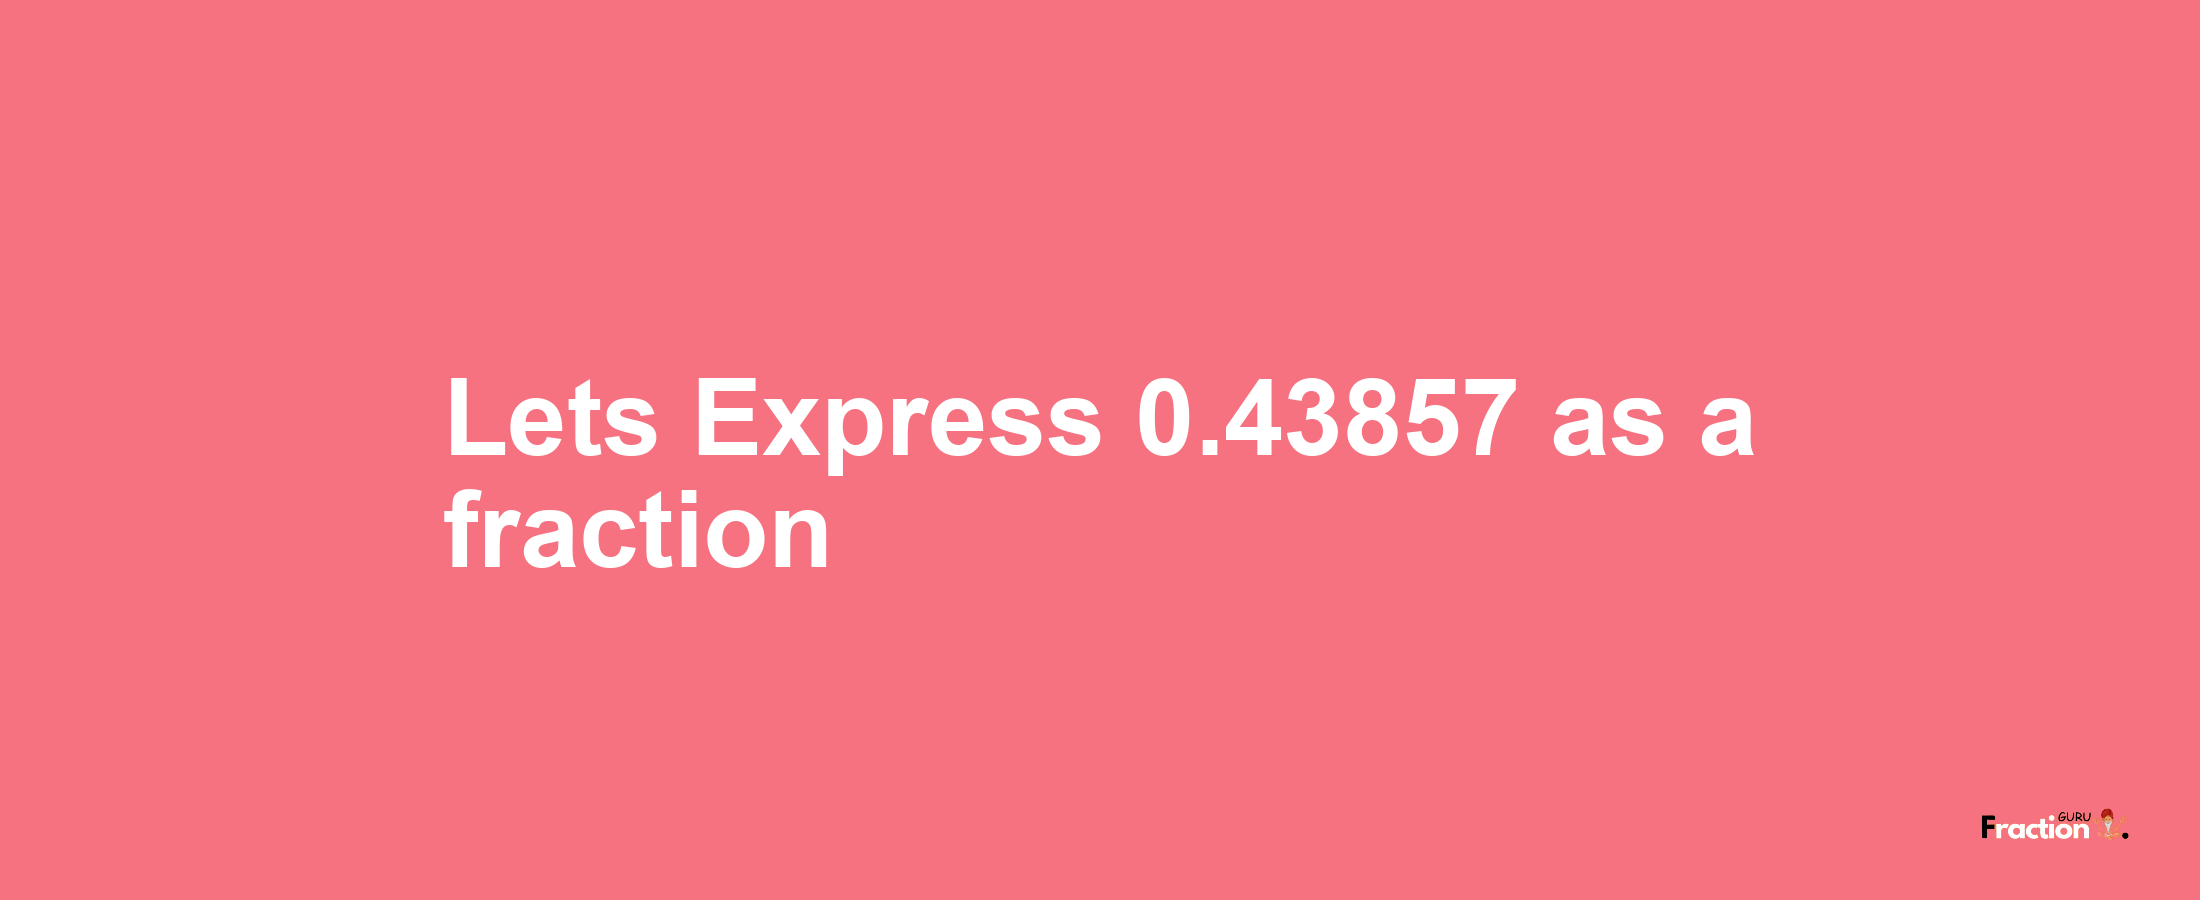 Lets Express 0.43857 as afraction